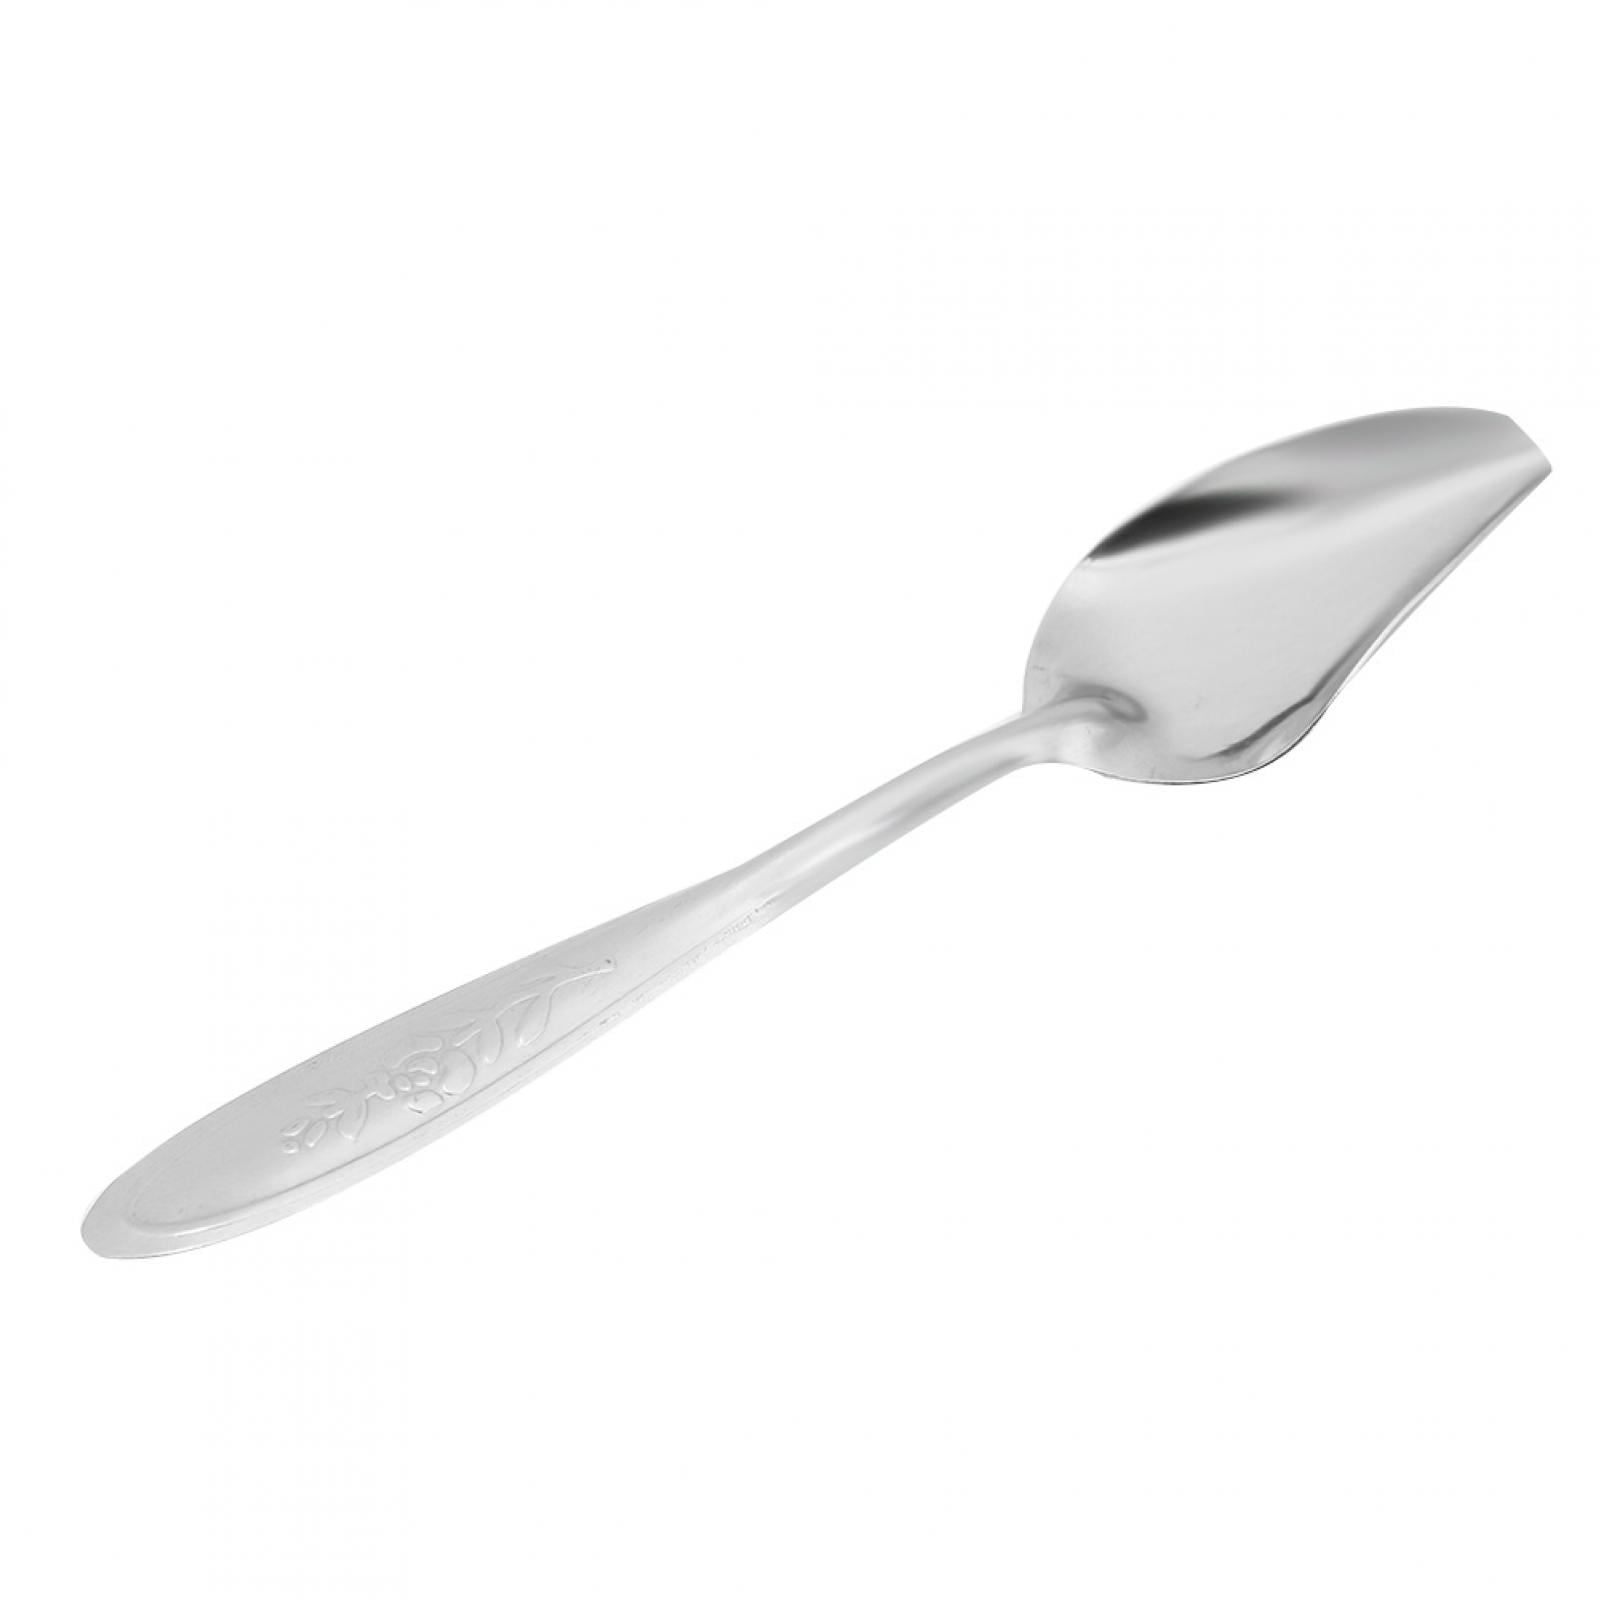 1Pc Thick Stainless Steel Grapefruit Spoon Dessert Spoon Serrated Edge useful 